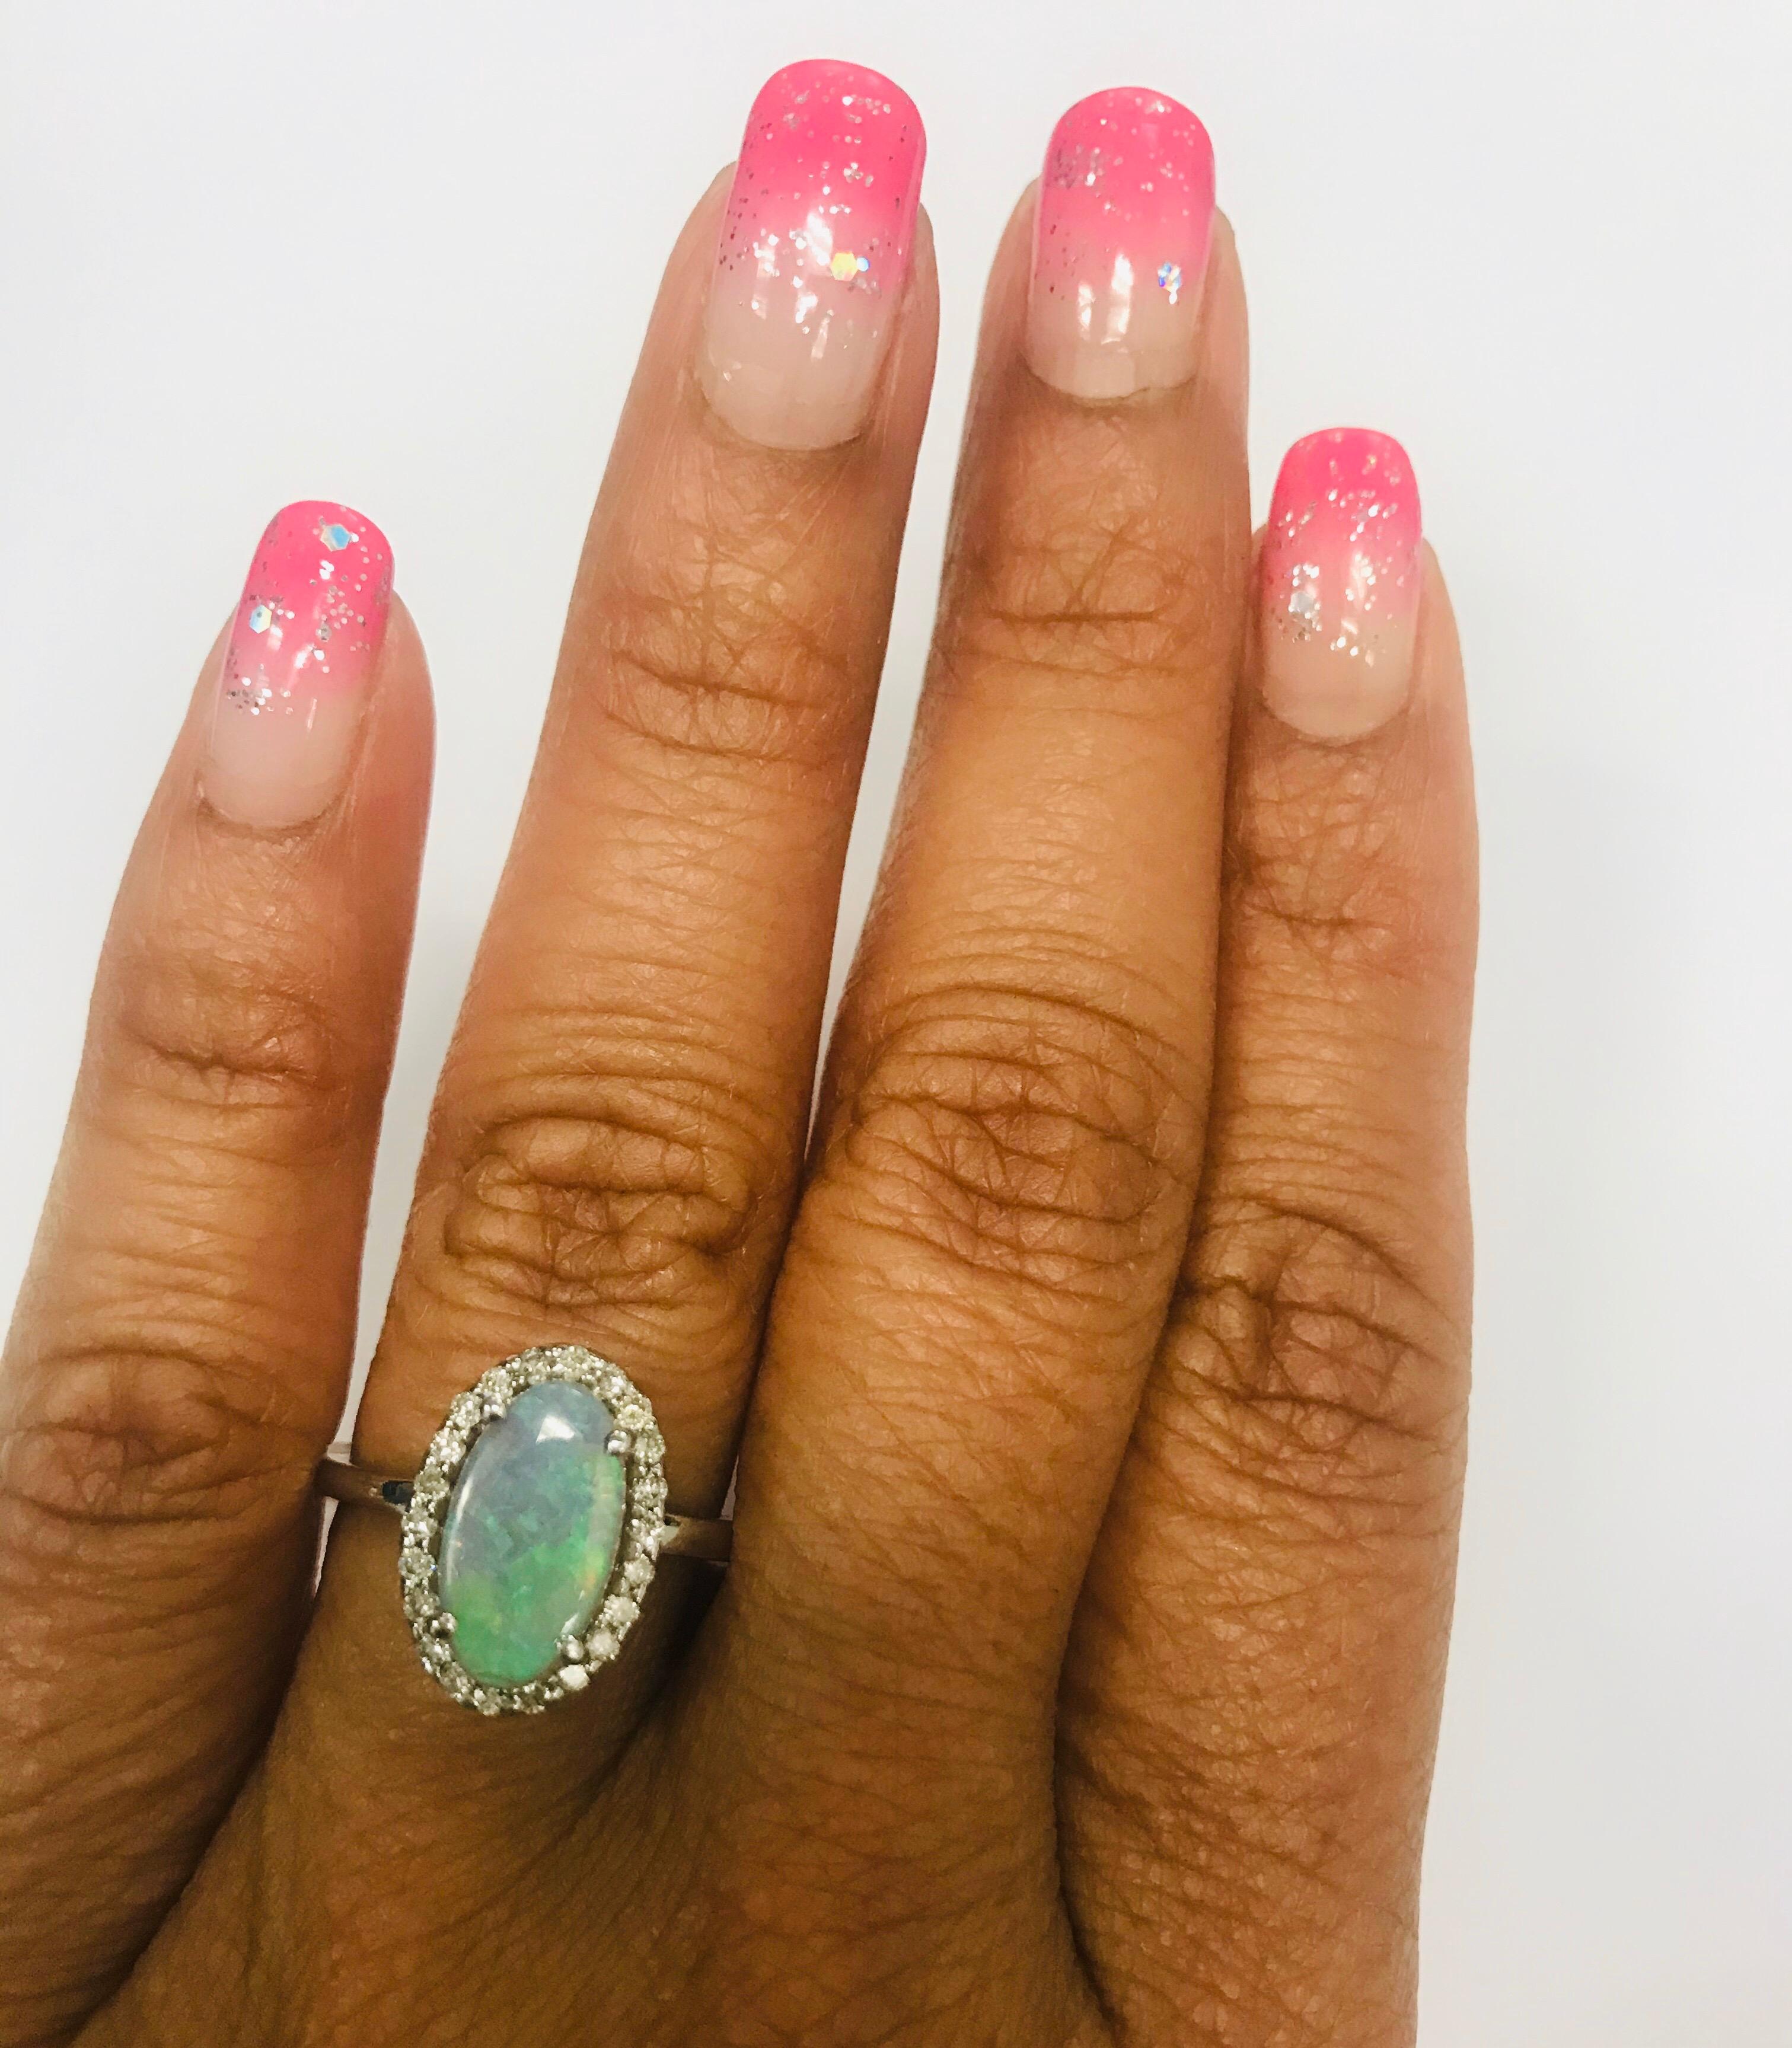 1.25 Carat Oval Cut Opal Diamond White Gold Cocktail Ring 1